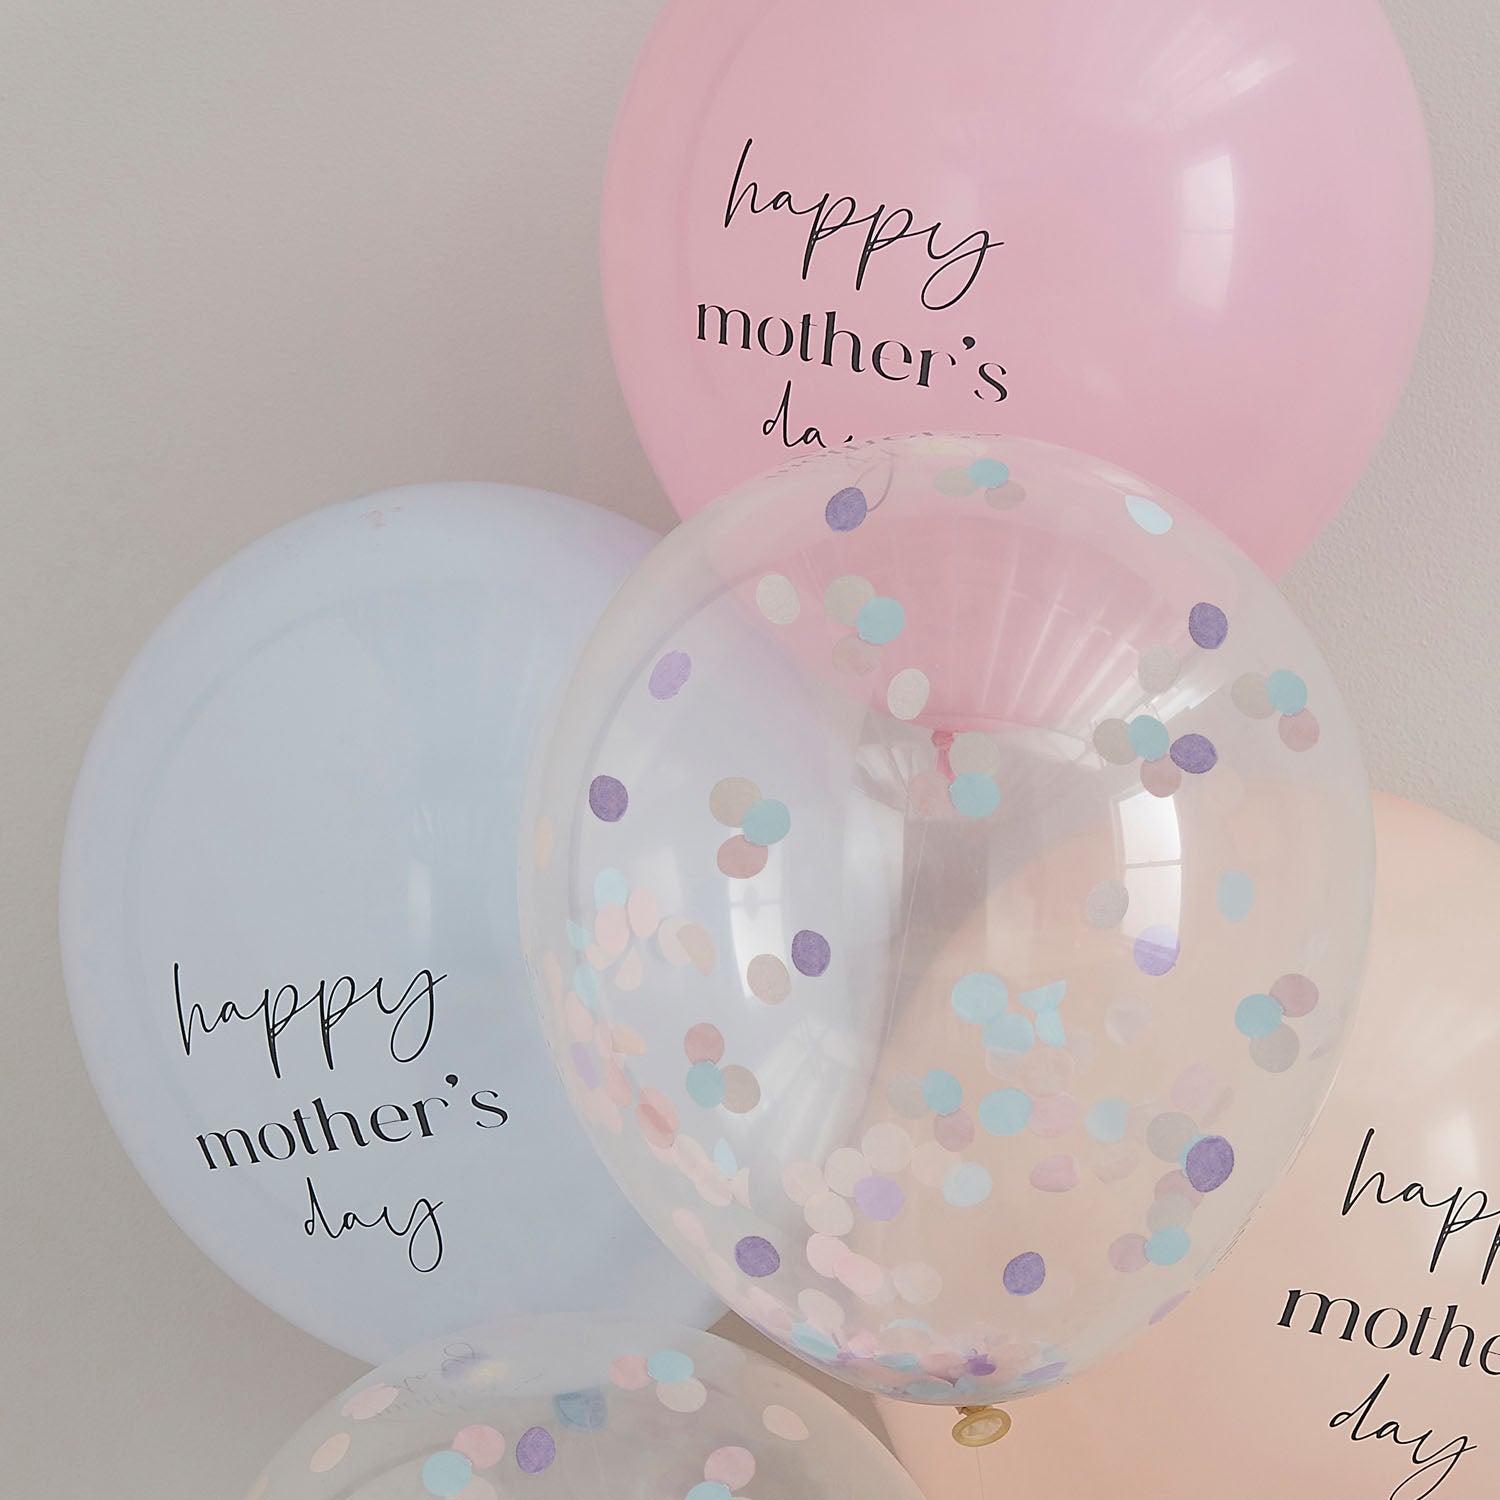 Latex balloons "Happy Mother's Day"